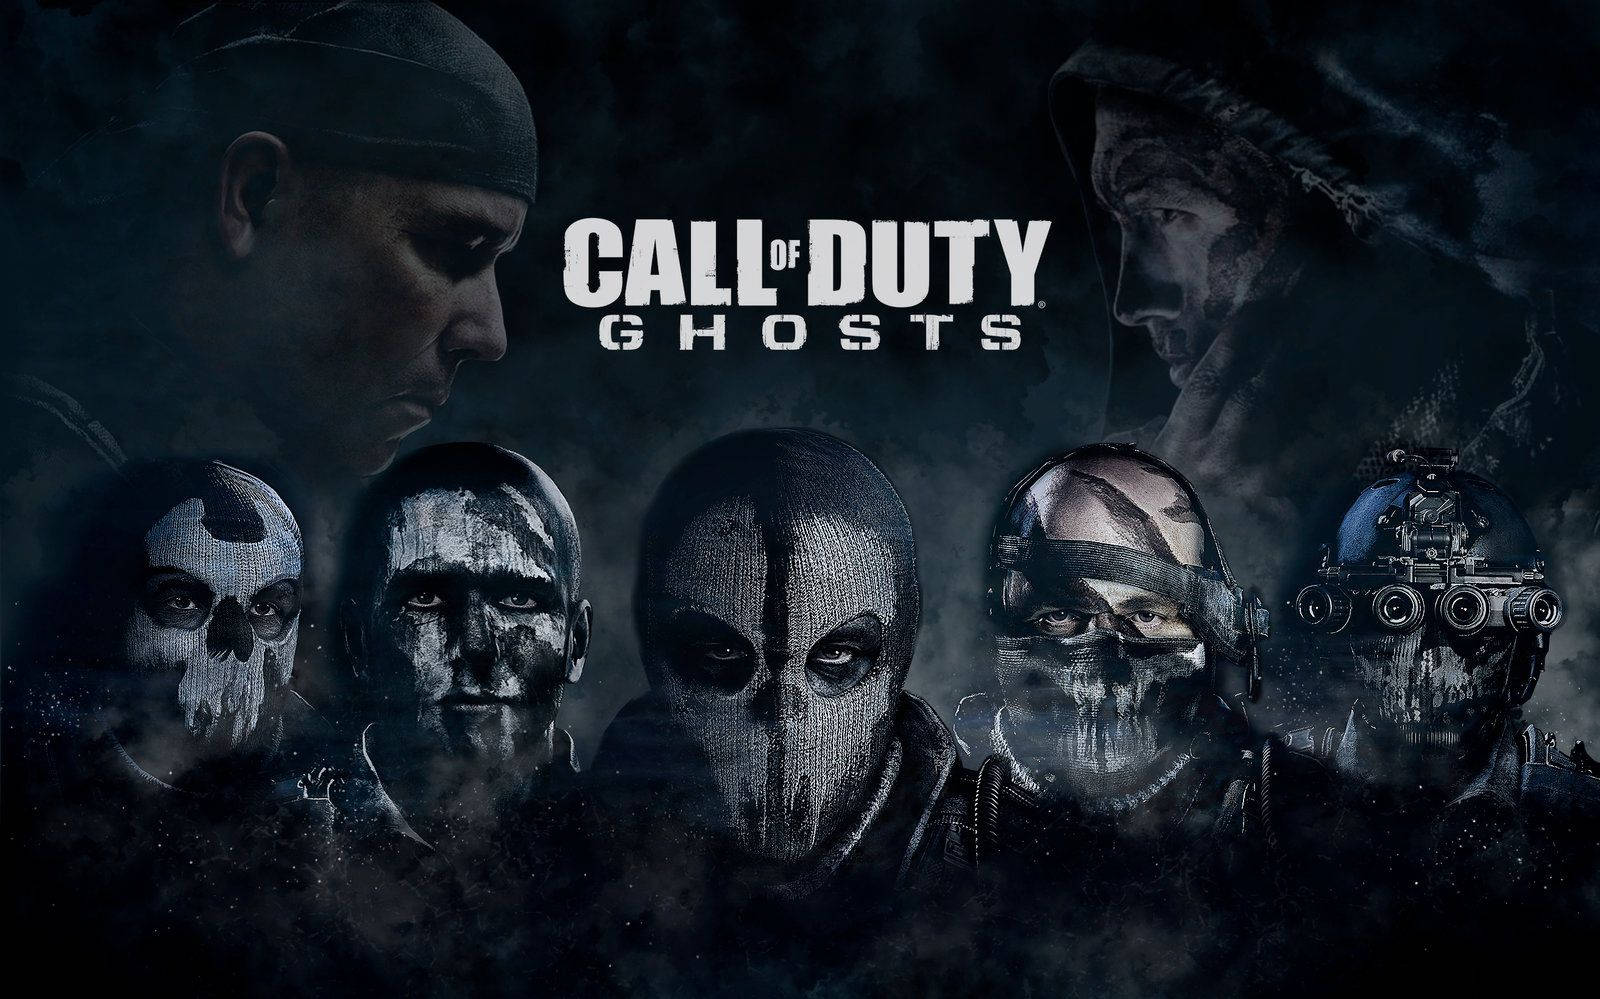 Formidably Masked - Call of Duty: Ghosts Wallpaper